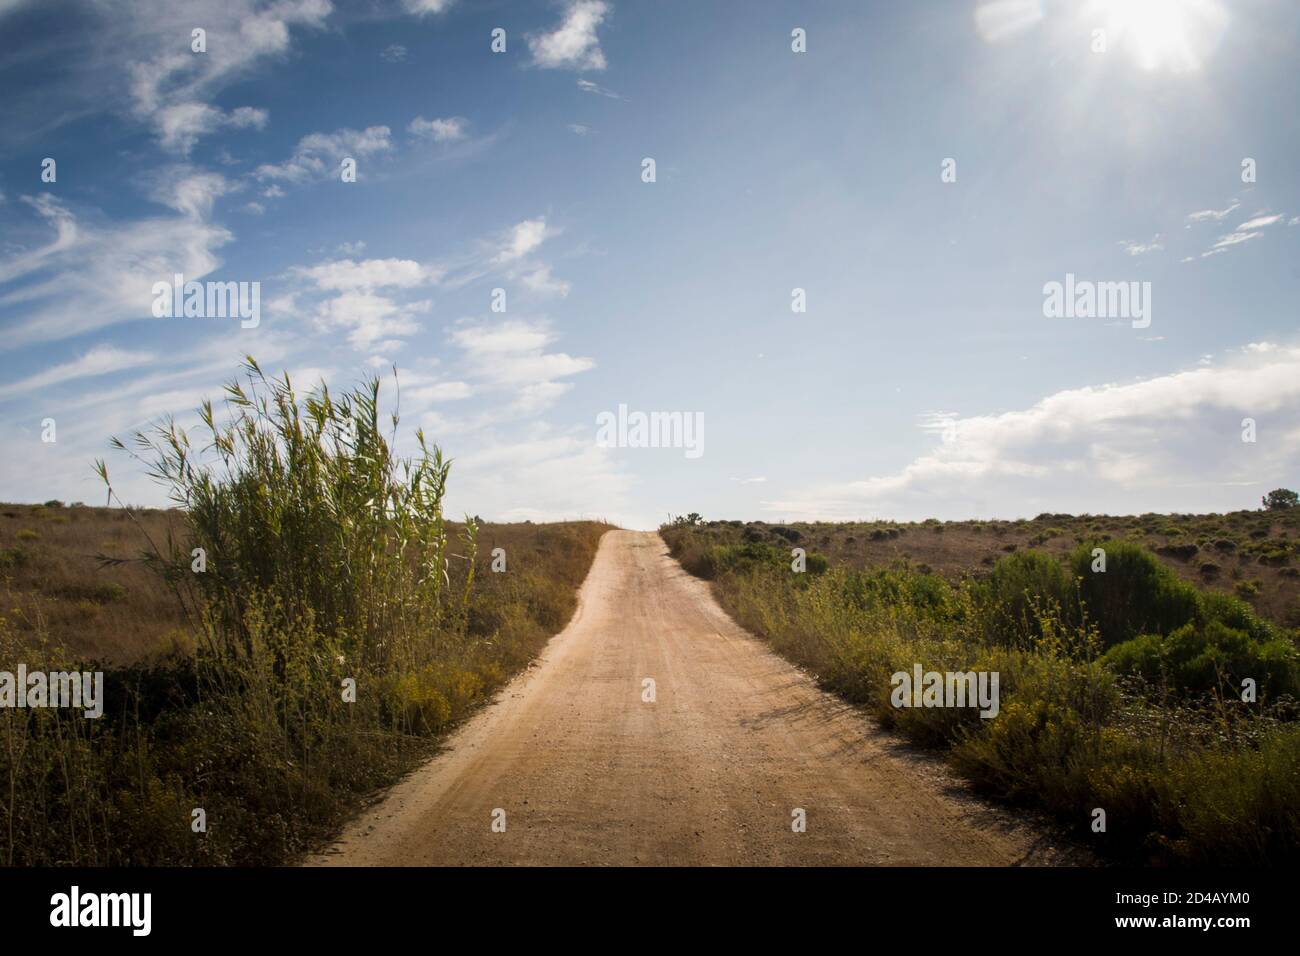 A dust road extends until the horizon line, in the middle of grass fields in a countryside landscape, under blue sky Stock Photo